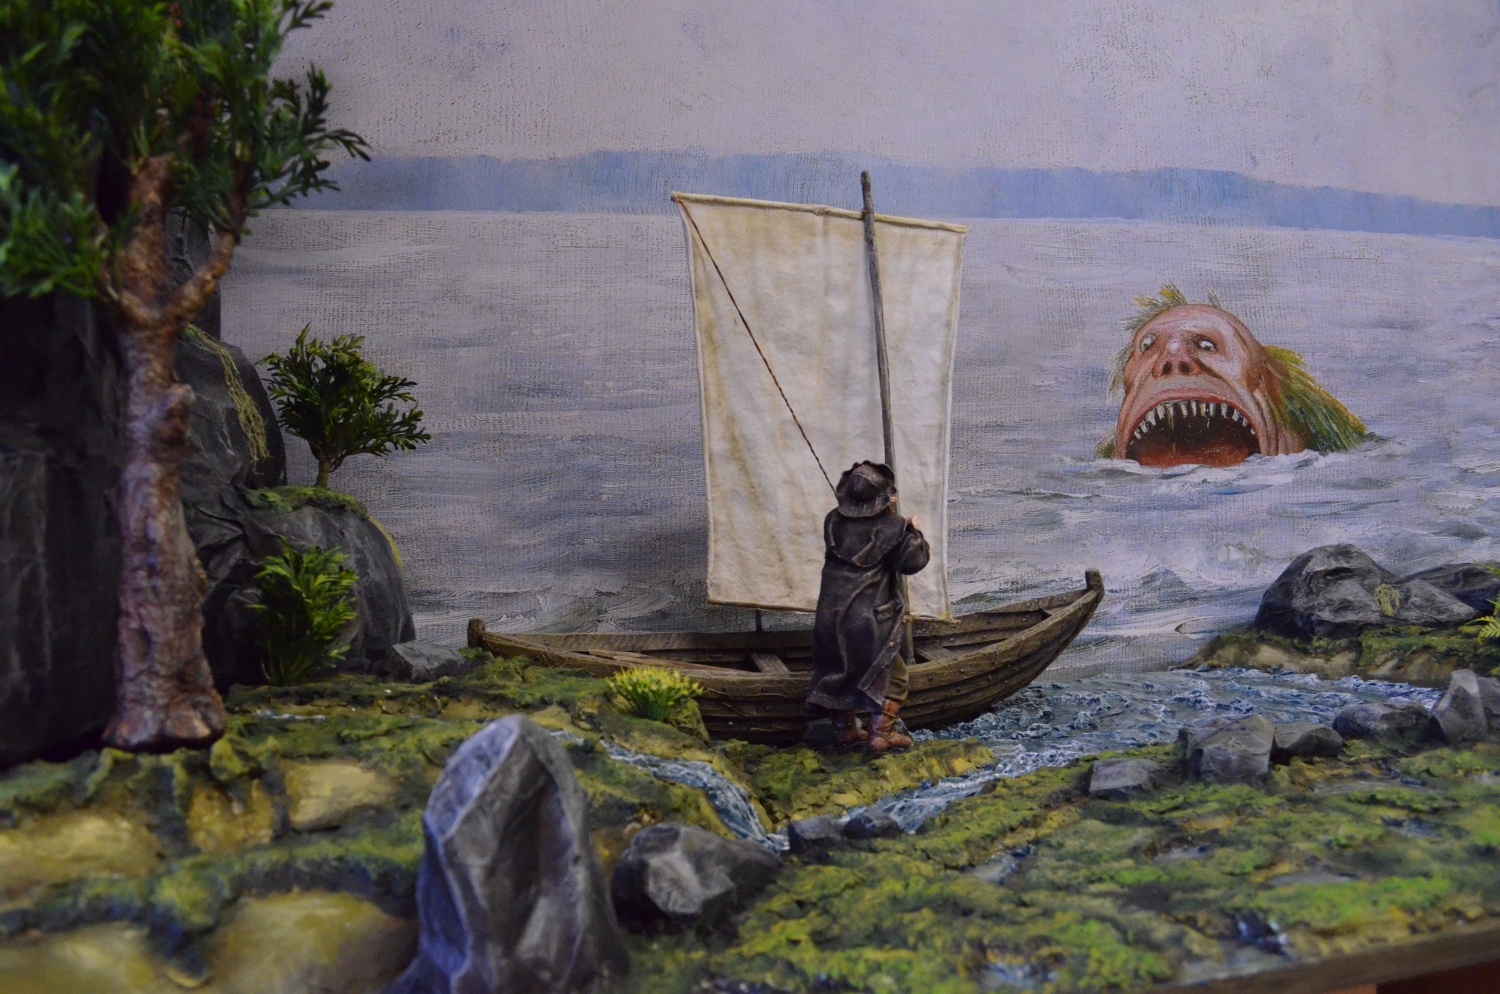 a sea troll scaring a man with a boat